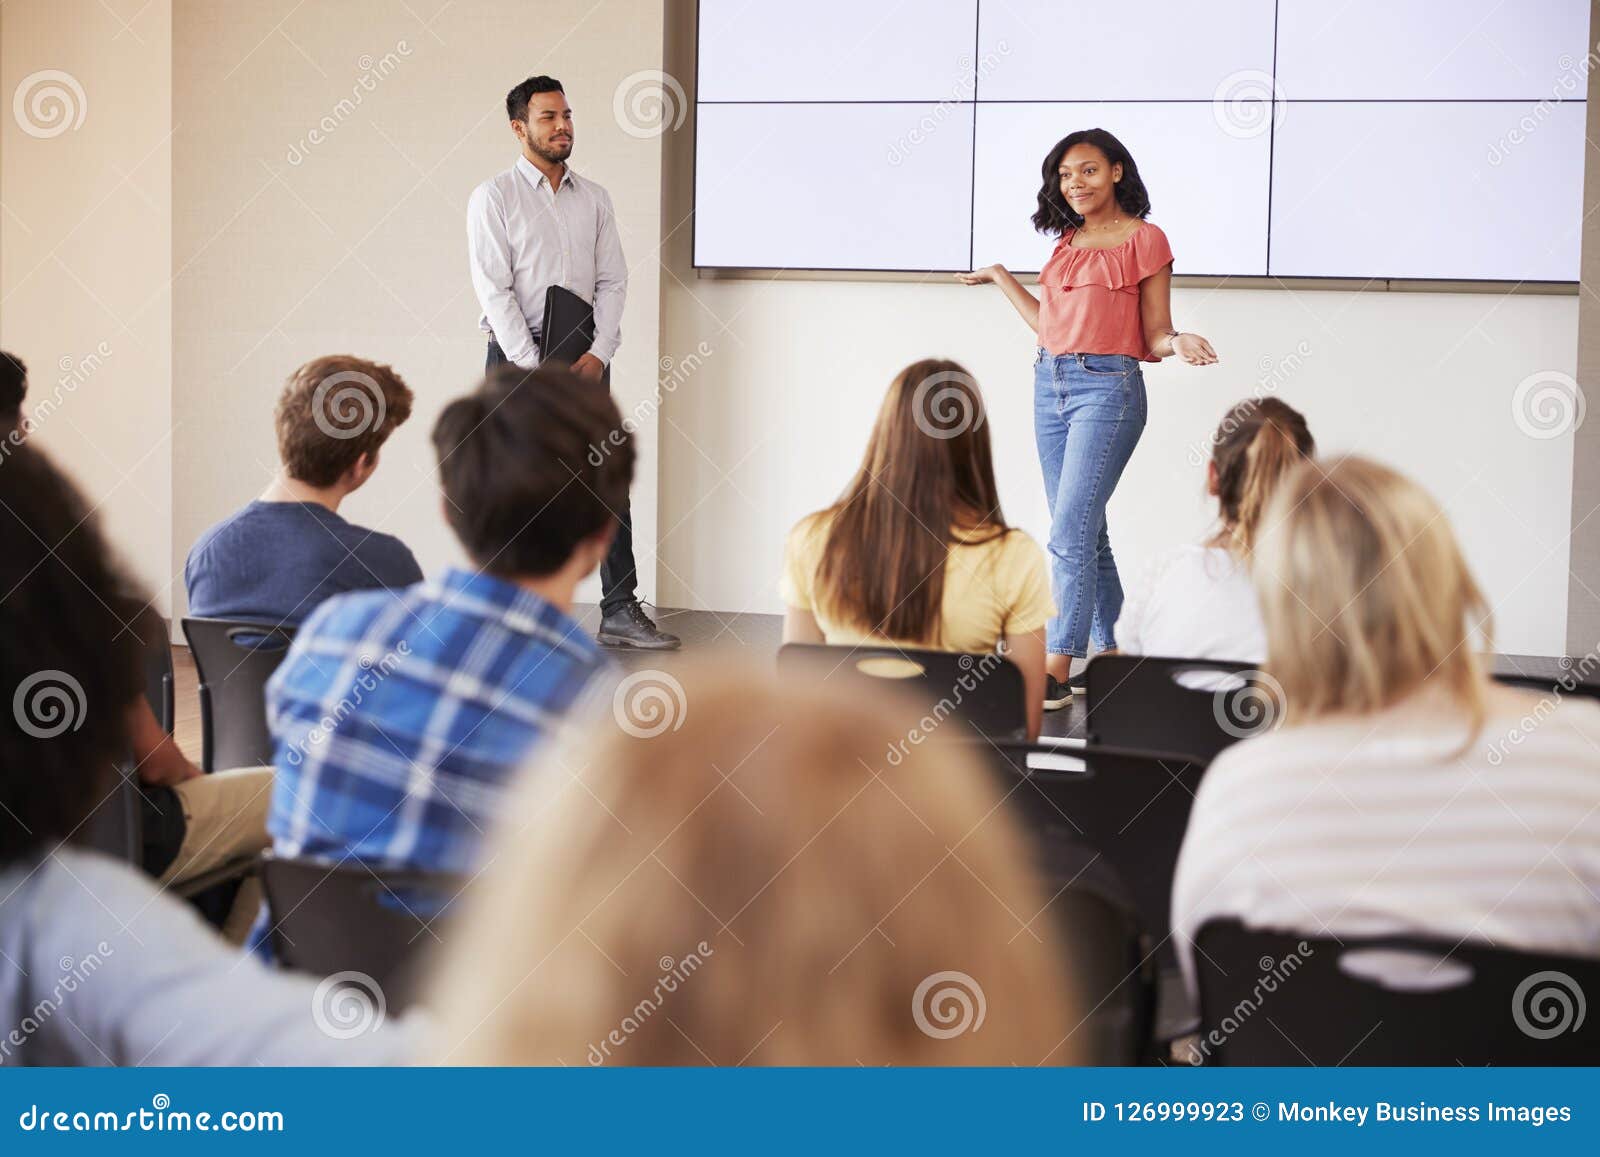 opening presentation in class